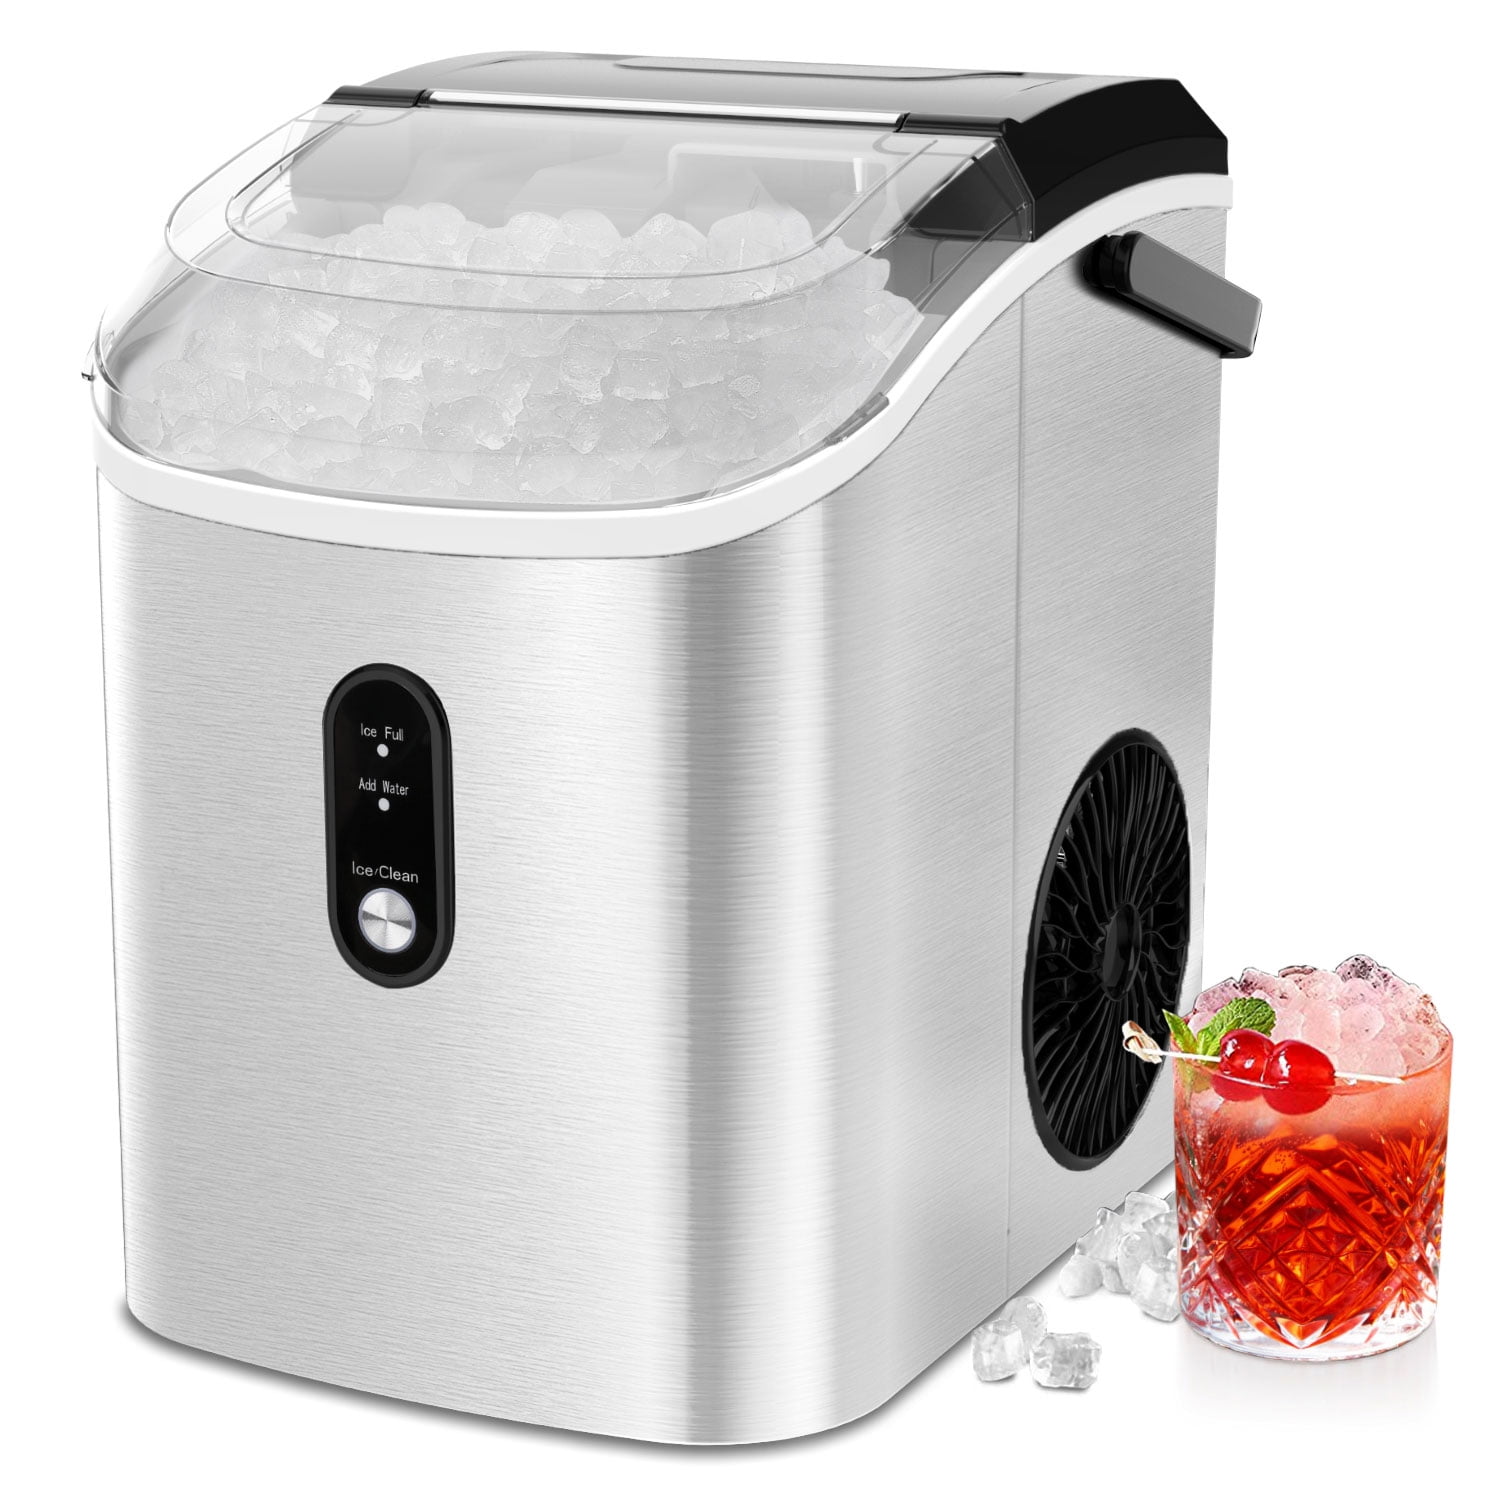 Antarctic Star Nugget Ice Maker Countertop with Soft Chewable Pellet Ice, 34Lbs/24H,Pebble Portable Ice Machine with Automatic Self-Cleaning - White